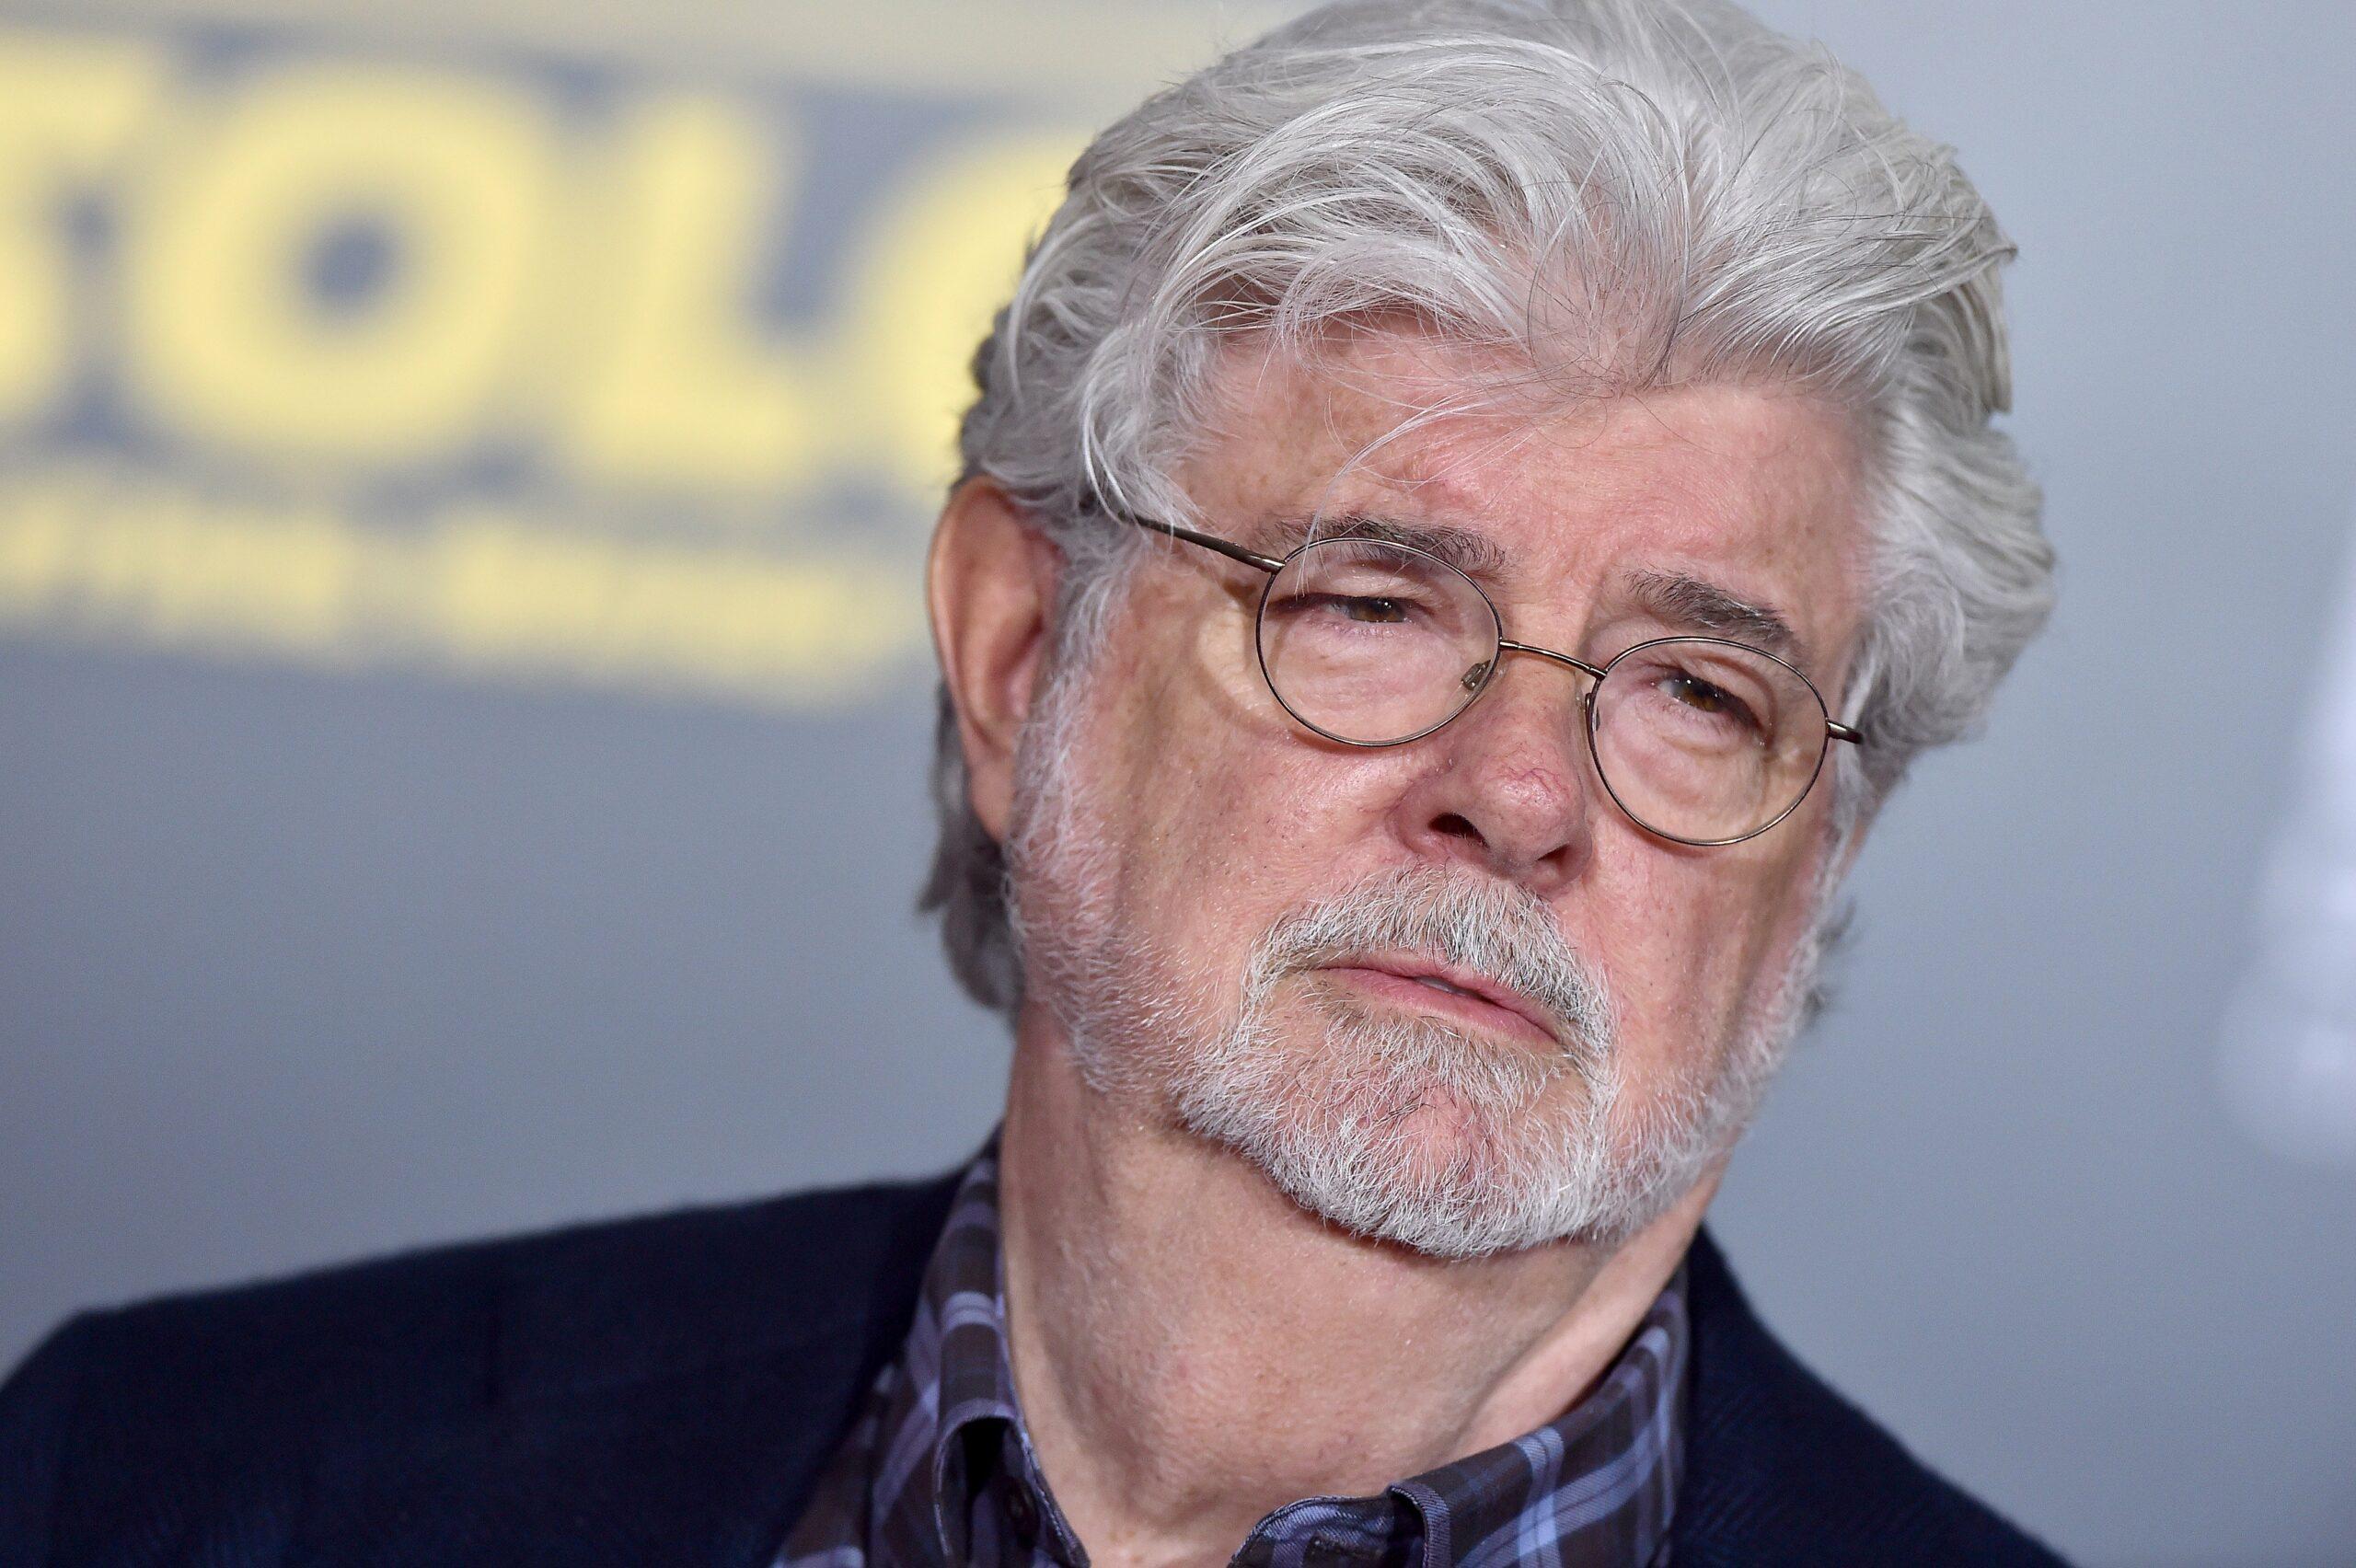 Mark Hamill And Star Wars Fans Wish George Lucas A Happy 78th Birthday